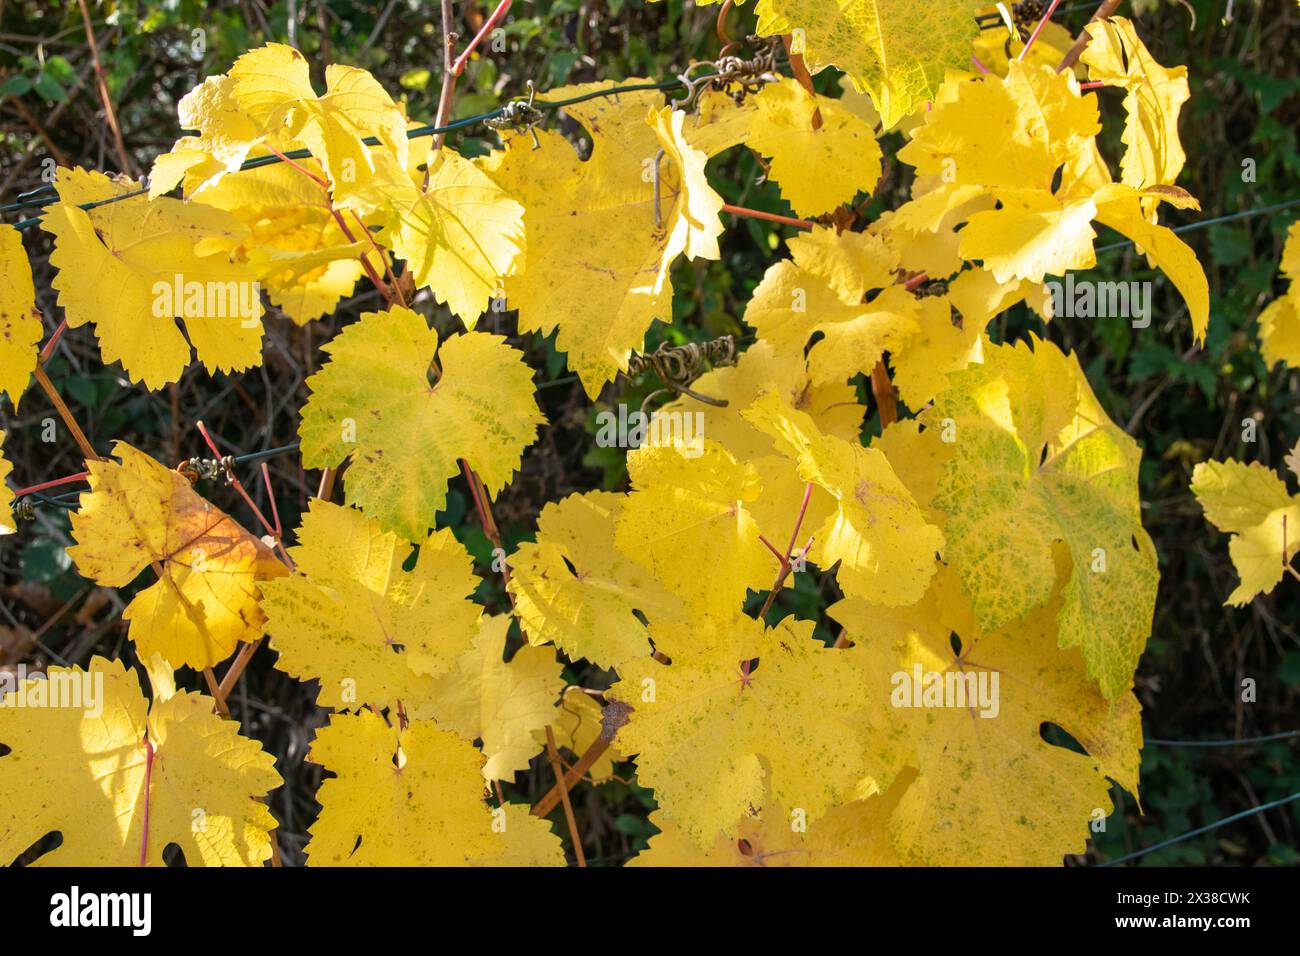 Yellow, orange leaves and autumn vineyard near the houses. Nature colorful background. Stock Photo